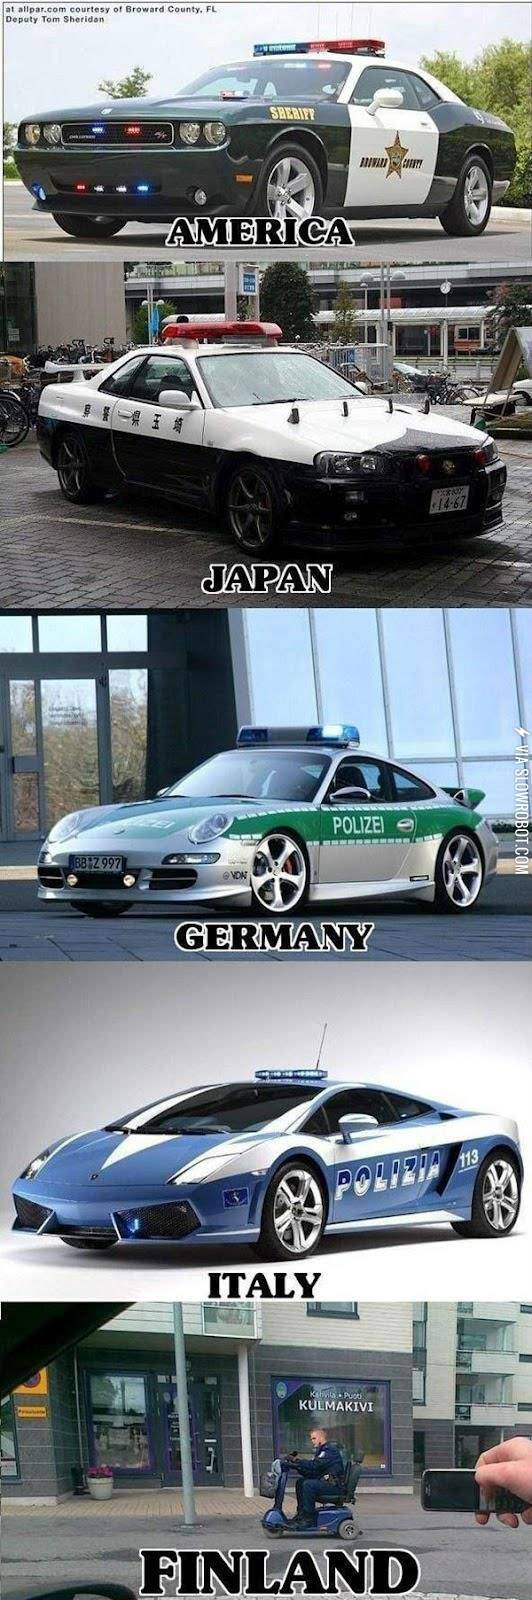 Police+in+different+countries.